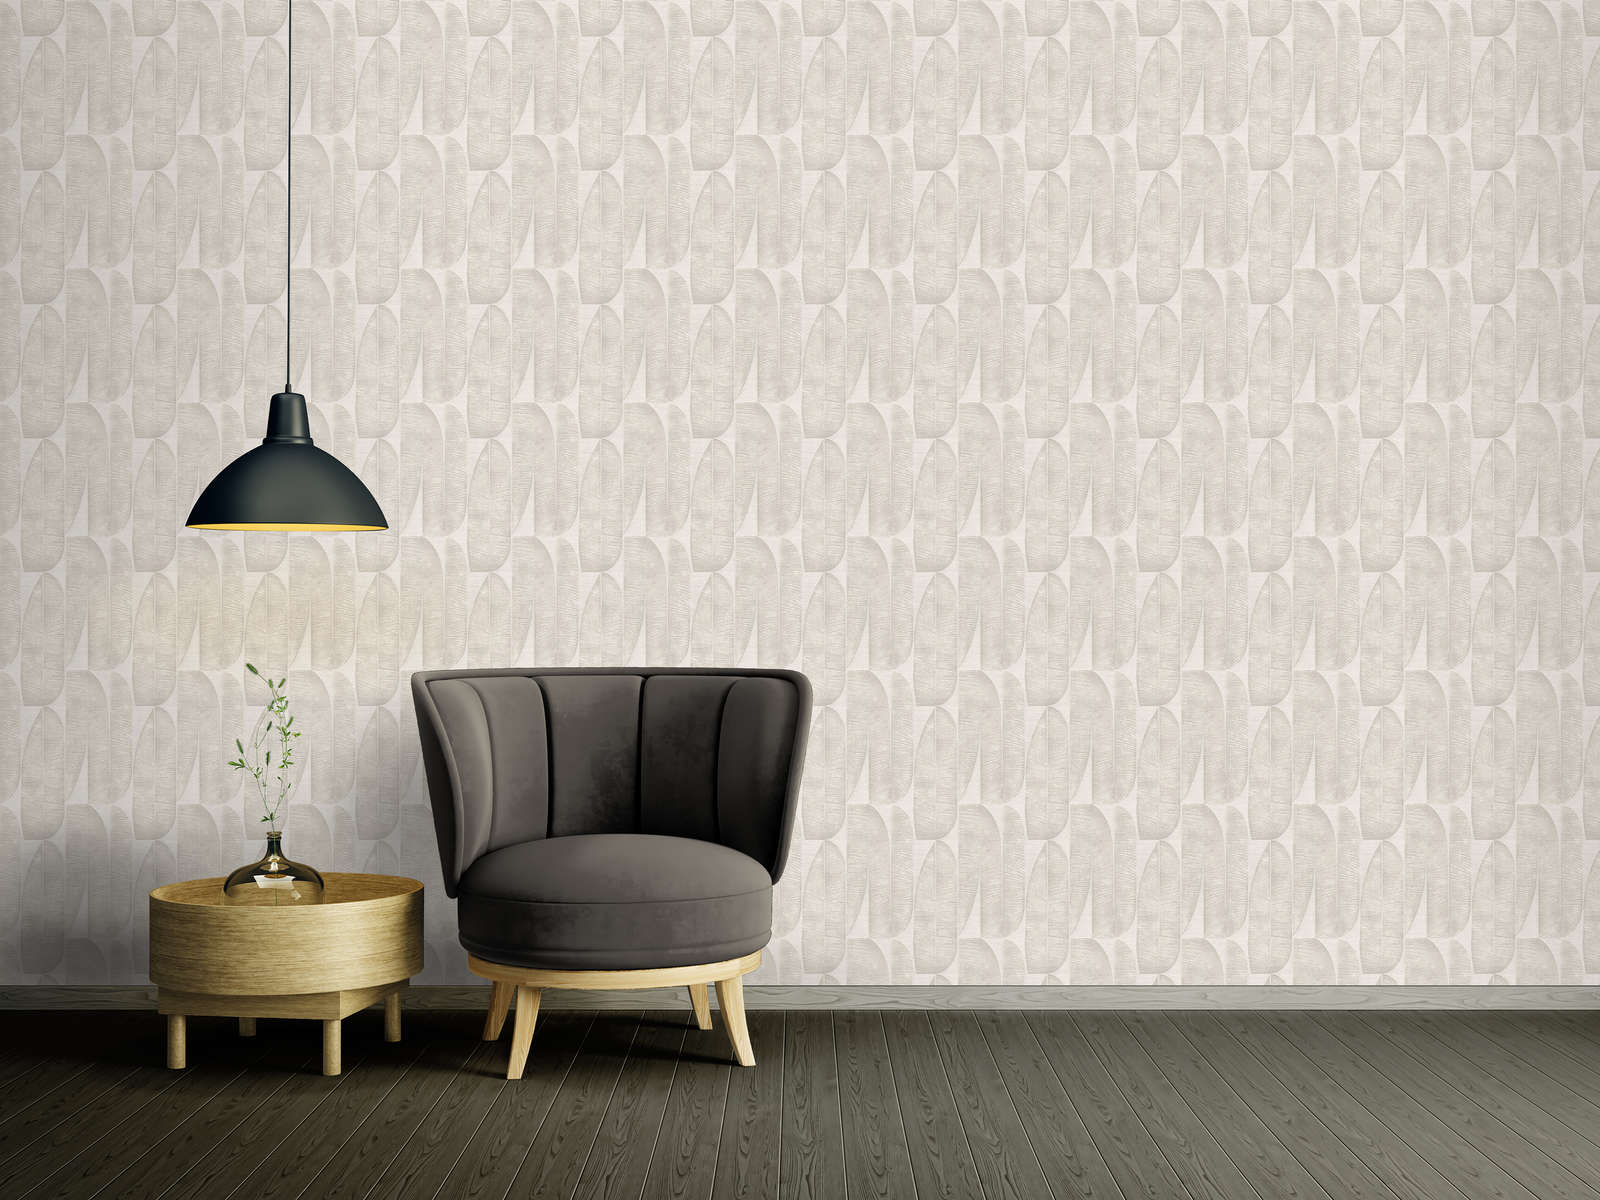             Non-woven wallpaper with geometric floral pattern - grey, beige
        